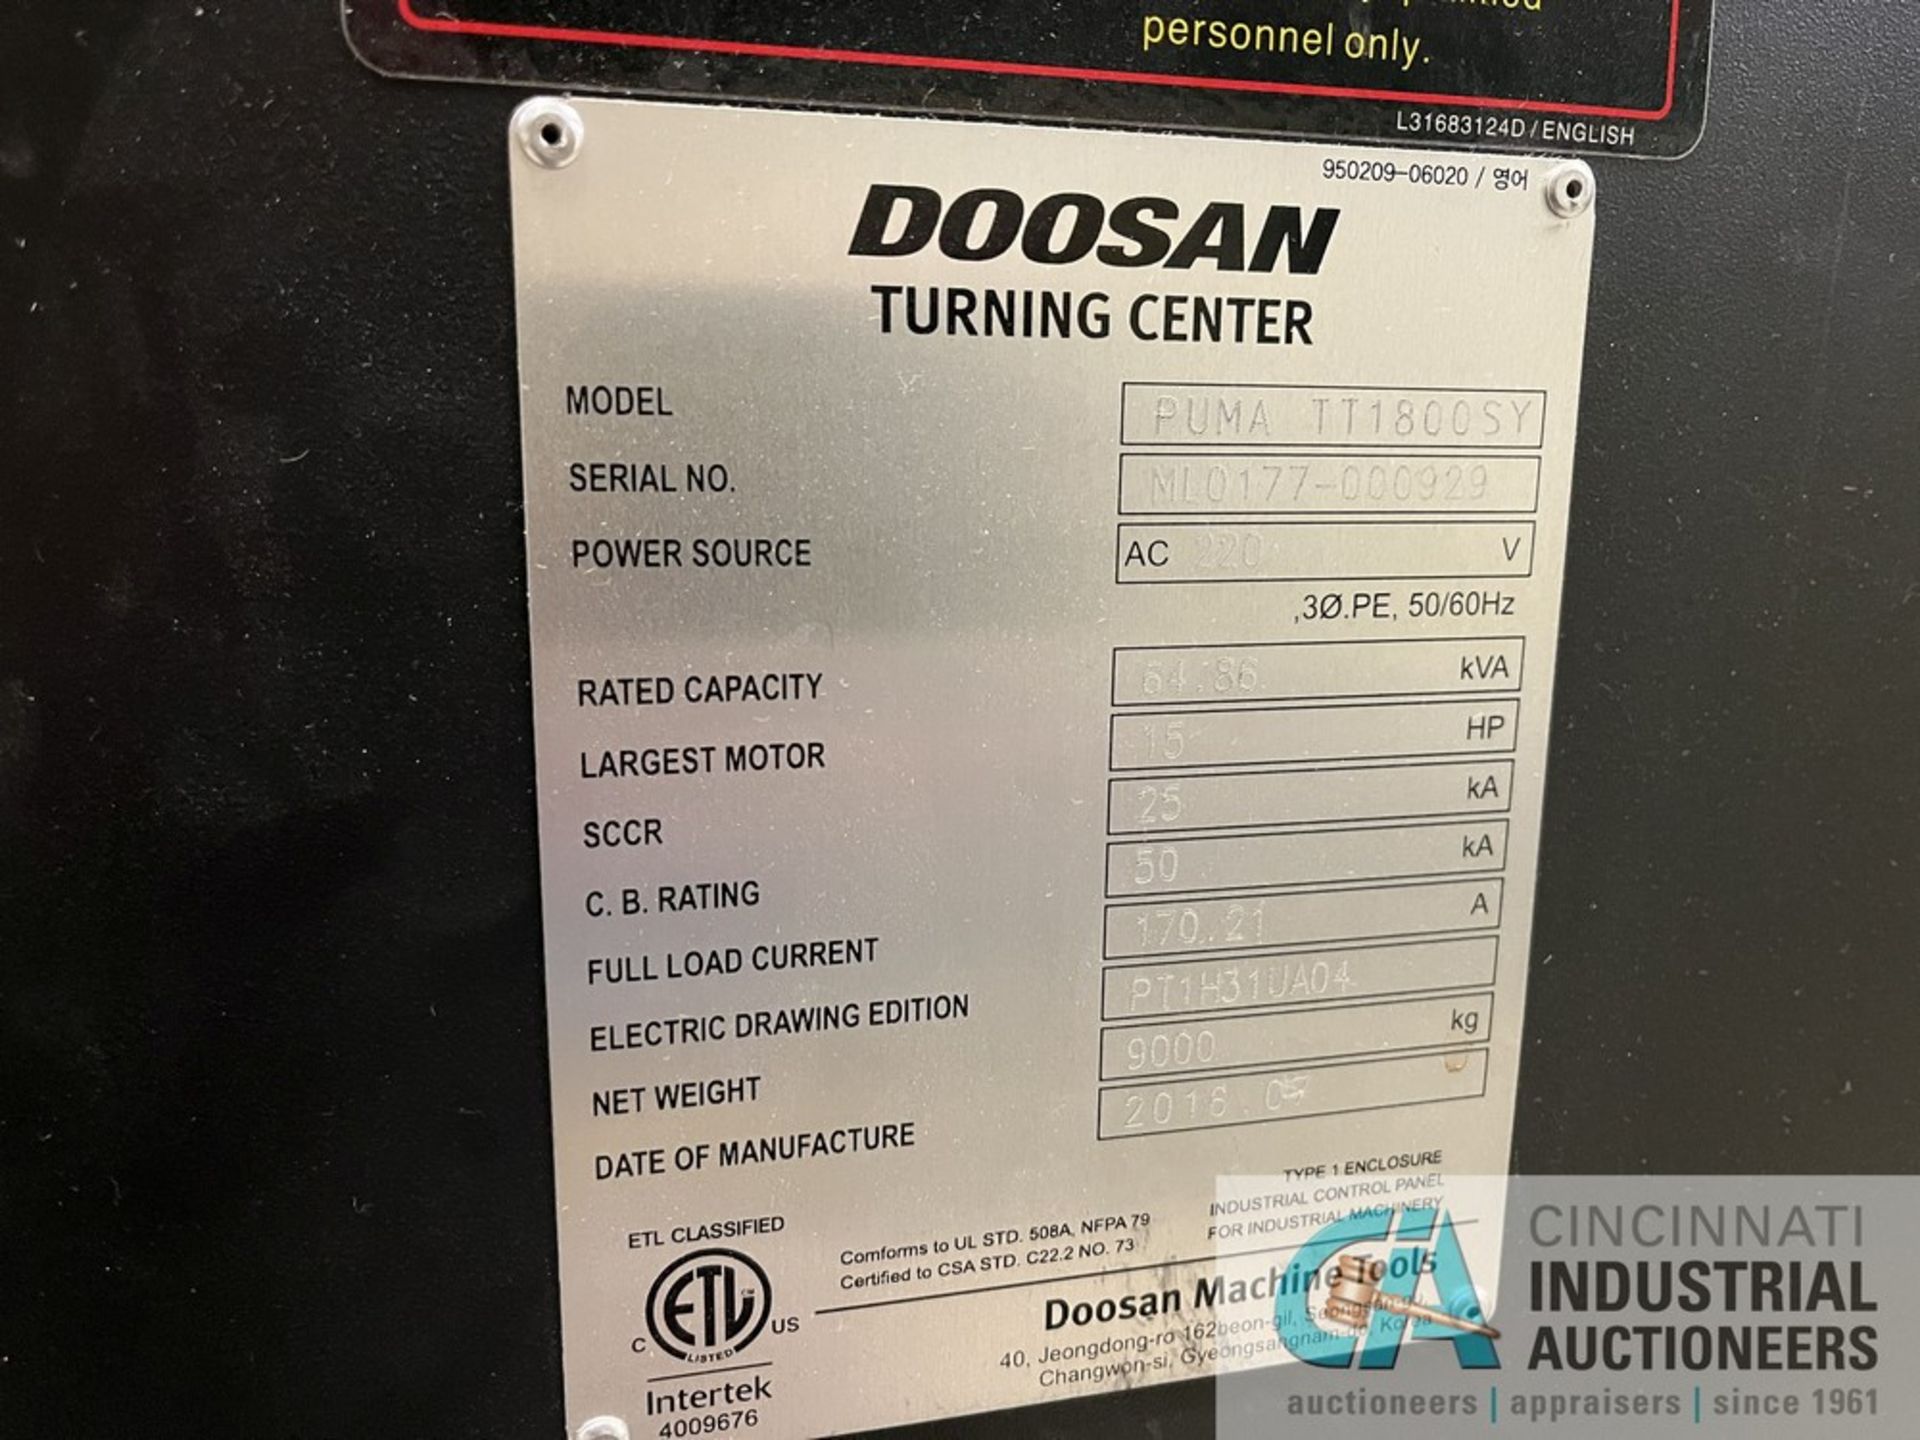 DOOSAN MODEL TT1800SY DUAL SPINDLE LIVE TOOL CNC LATHE; S/N ML0177-000929 (NEW 7/2016), DISTANCE - Image 16 of 17